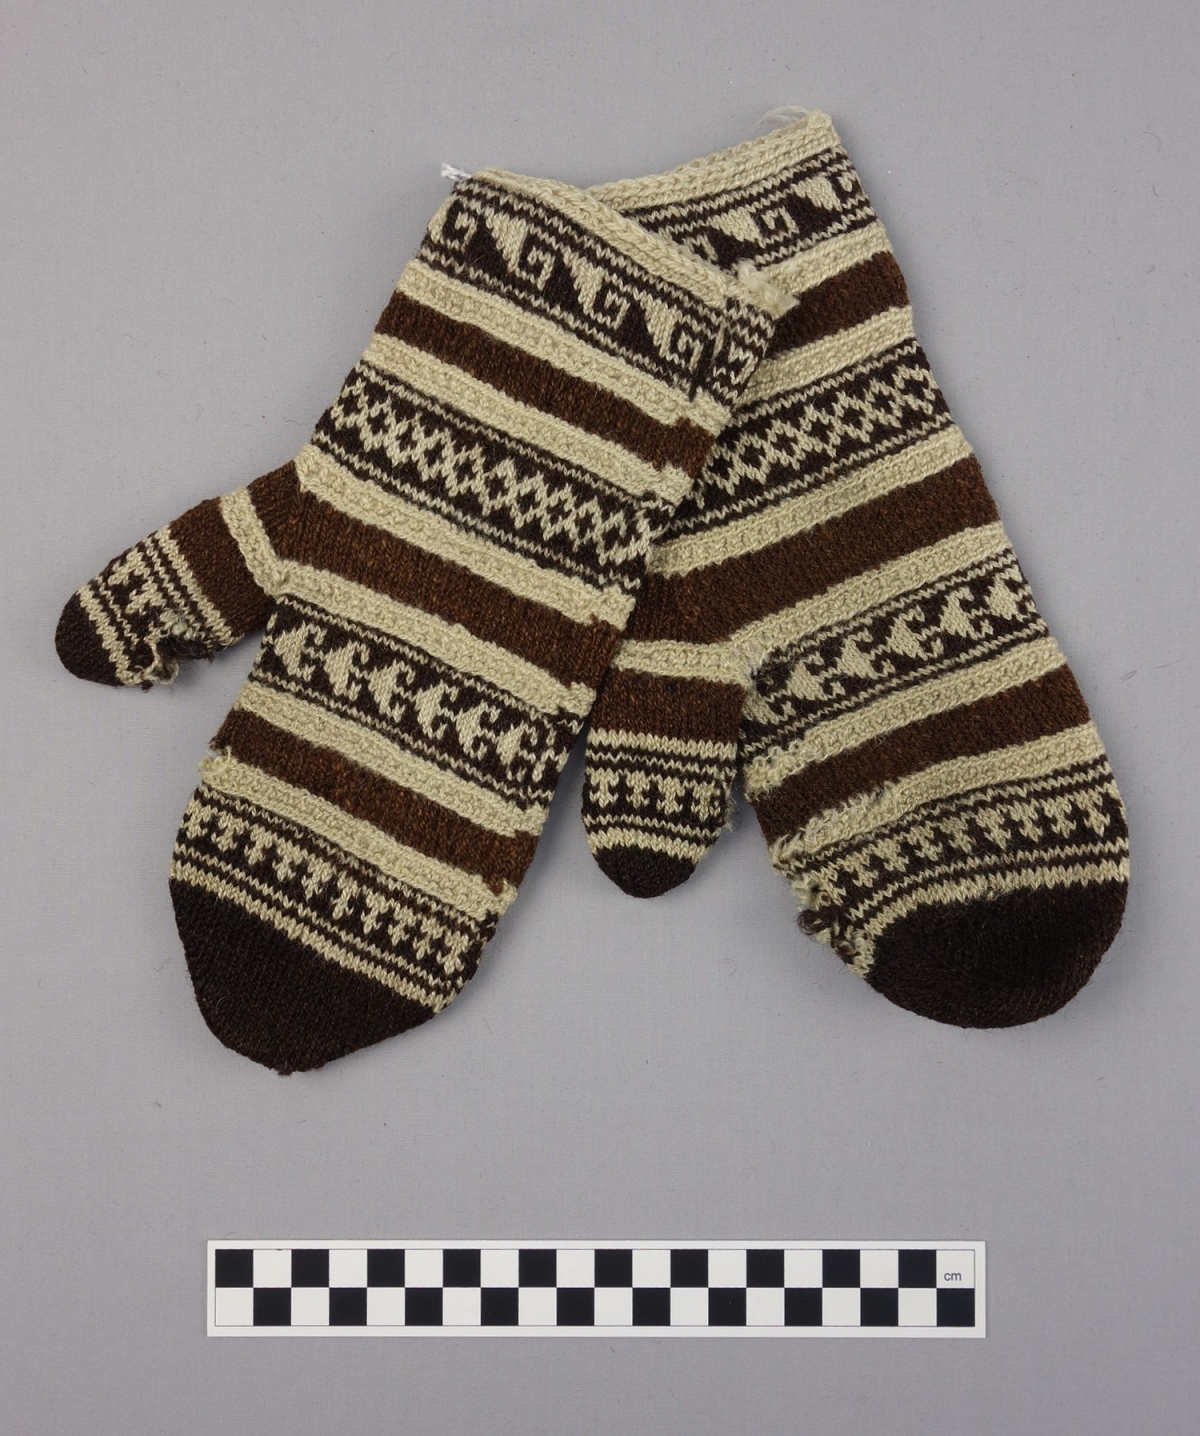 Knitted mittens from Afghanistan, mid-20th century.